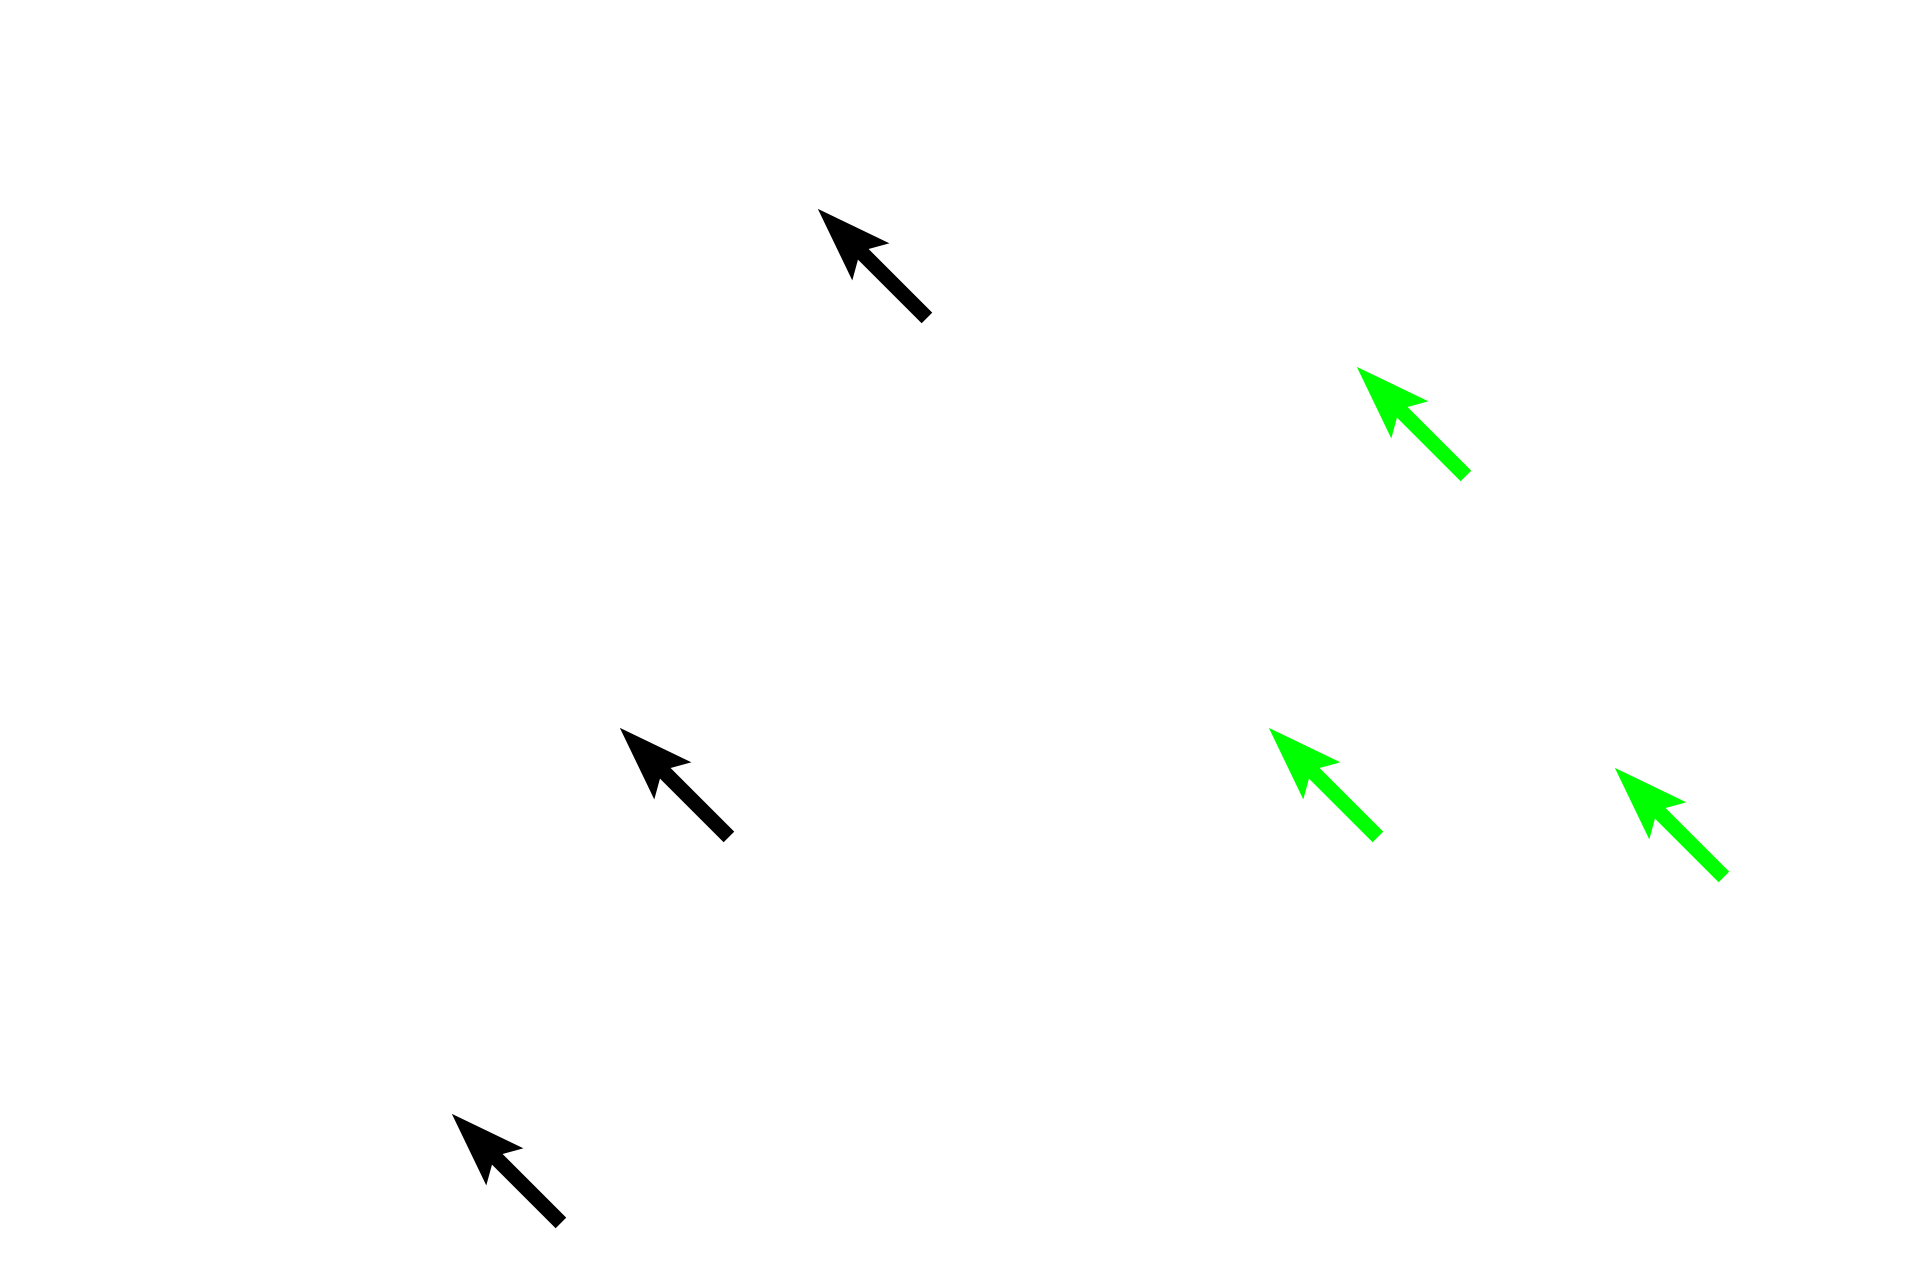 Fibroblast nuclei <p>Connective tissue consists of cells and an extracellular matrix composed of fibers (collagen, reticular and elastic), ground substance and tissue fluid. Ground substance, primarily proteoglycans, is present as a gel in connective tissue proper, where it surrounds cells and fibers, and serves as padding between other tissues and organs of the body. 400x, 400x</p>
